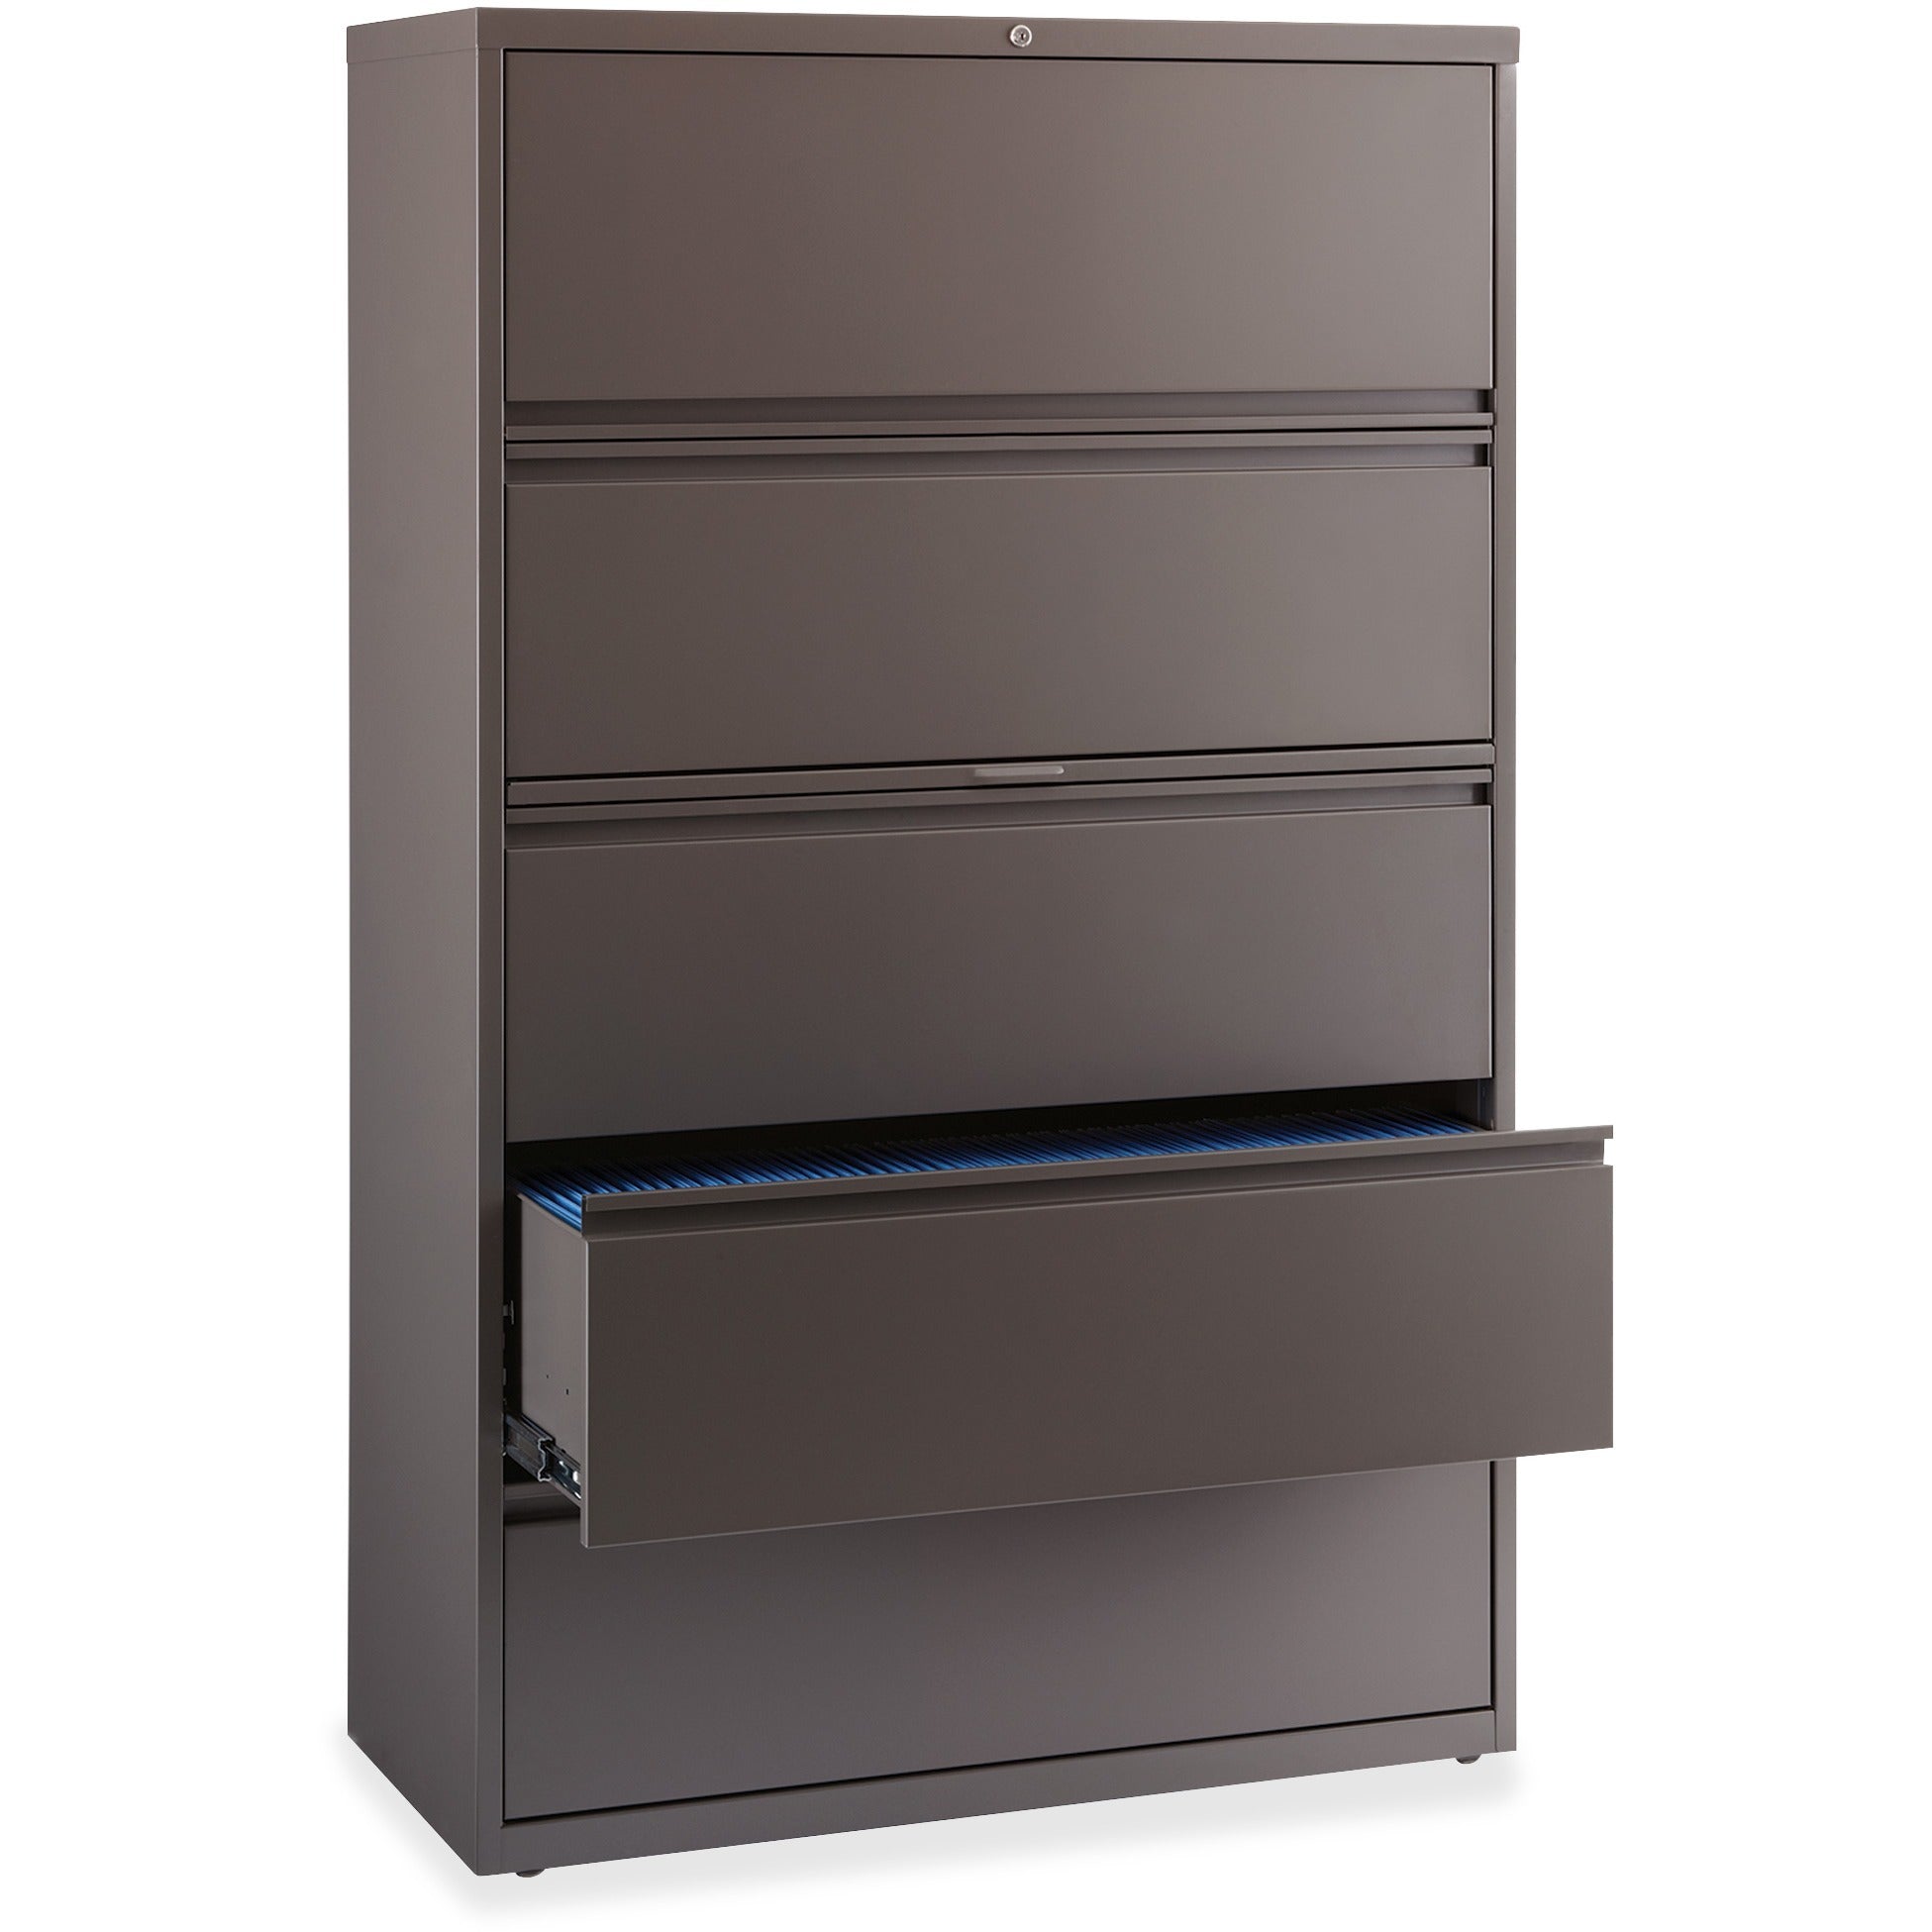 Lorell Fortress Series Lateral File w/Roll-out Posting Shelf - 42" x 18.6" x 67.6" - 1 x Shelf(ves) - 5 x Drawer(s) for File - Letter, Legal, A4 - Lateral - Magnetic Label Holder, Ball Bearing Slide, Ball-bearing Suspension, Adjustable Leveler, Inter - 